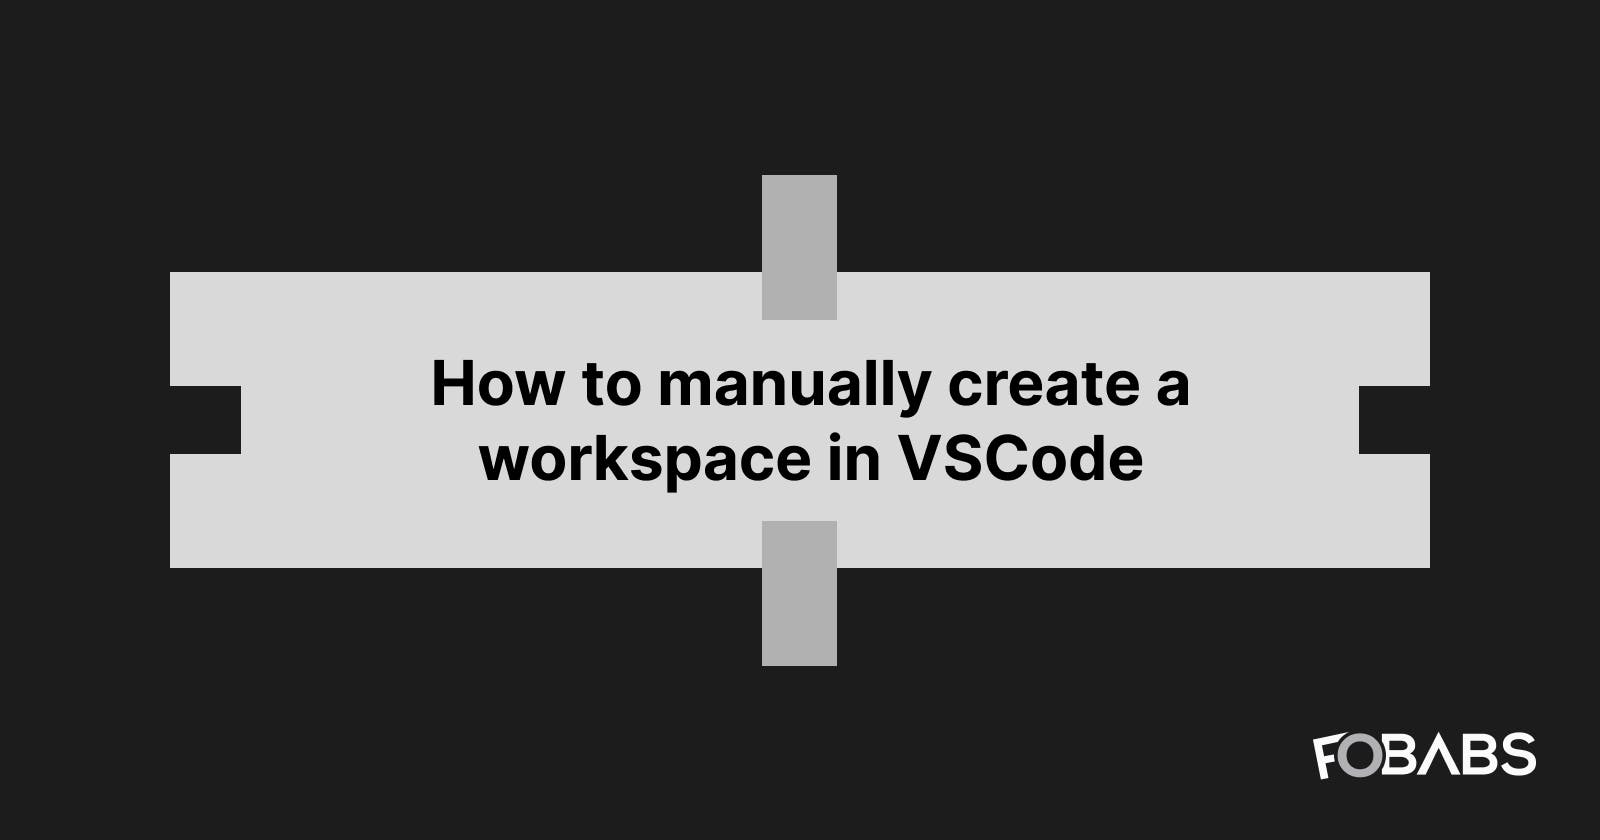 How to manually create a workspace in VSCode